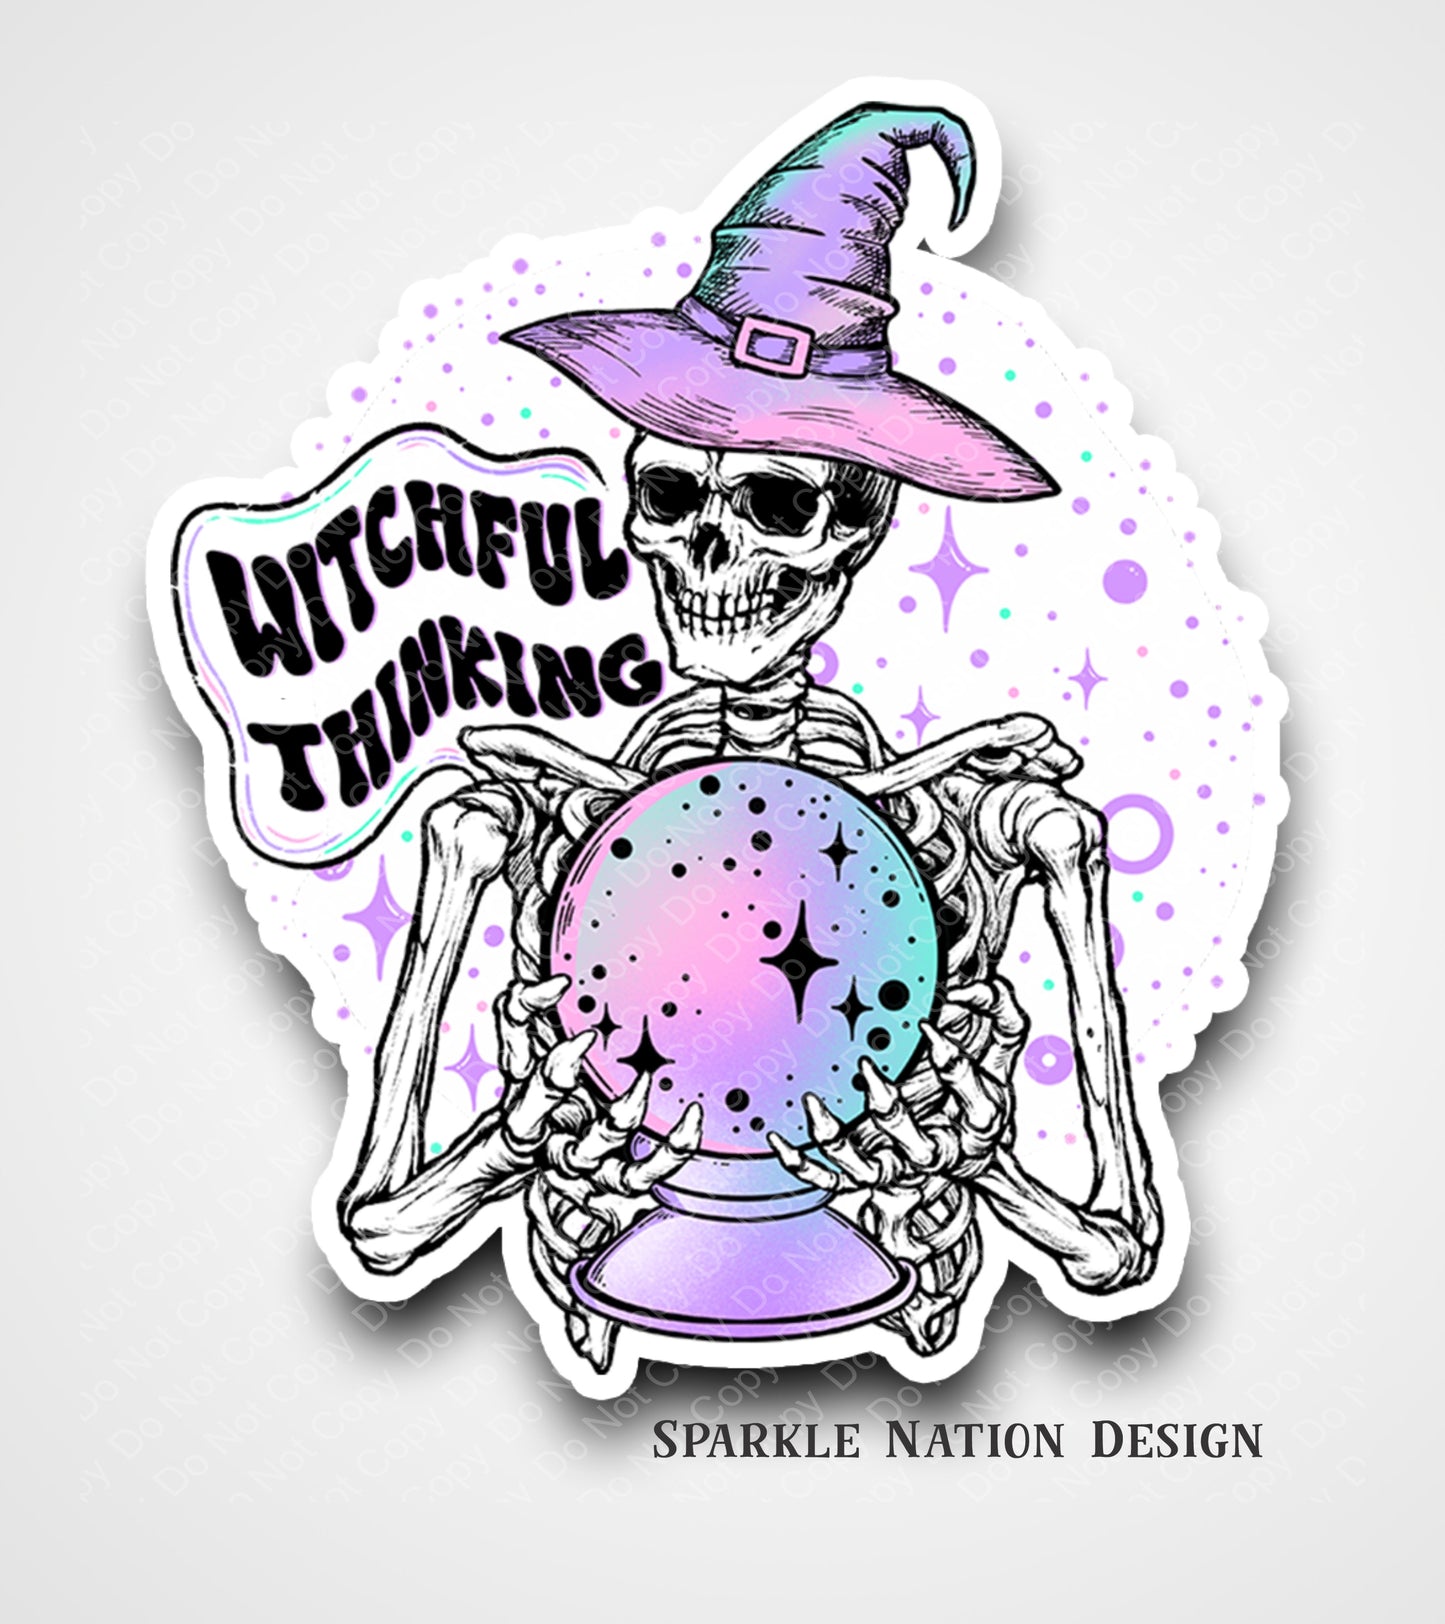 Witchful Thinking Skeleton Crystal Ball Sticker